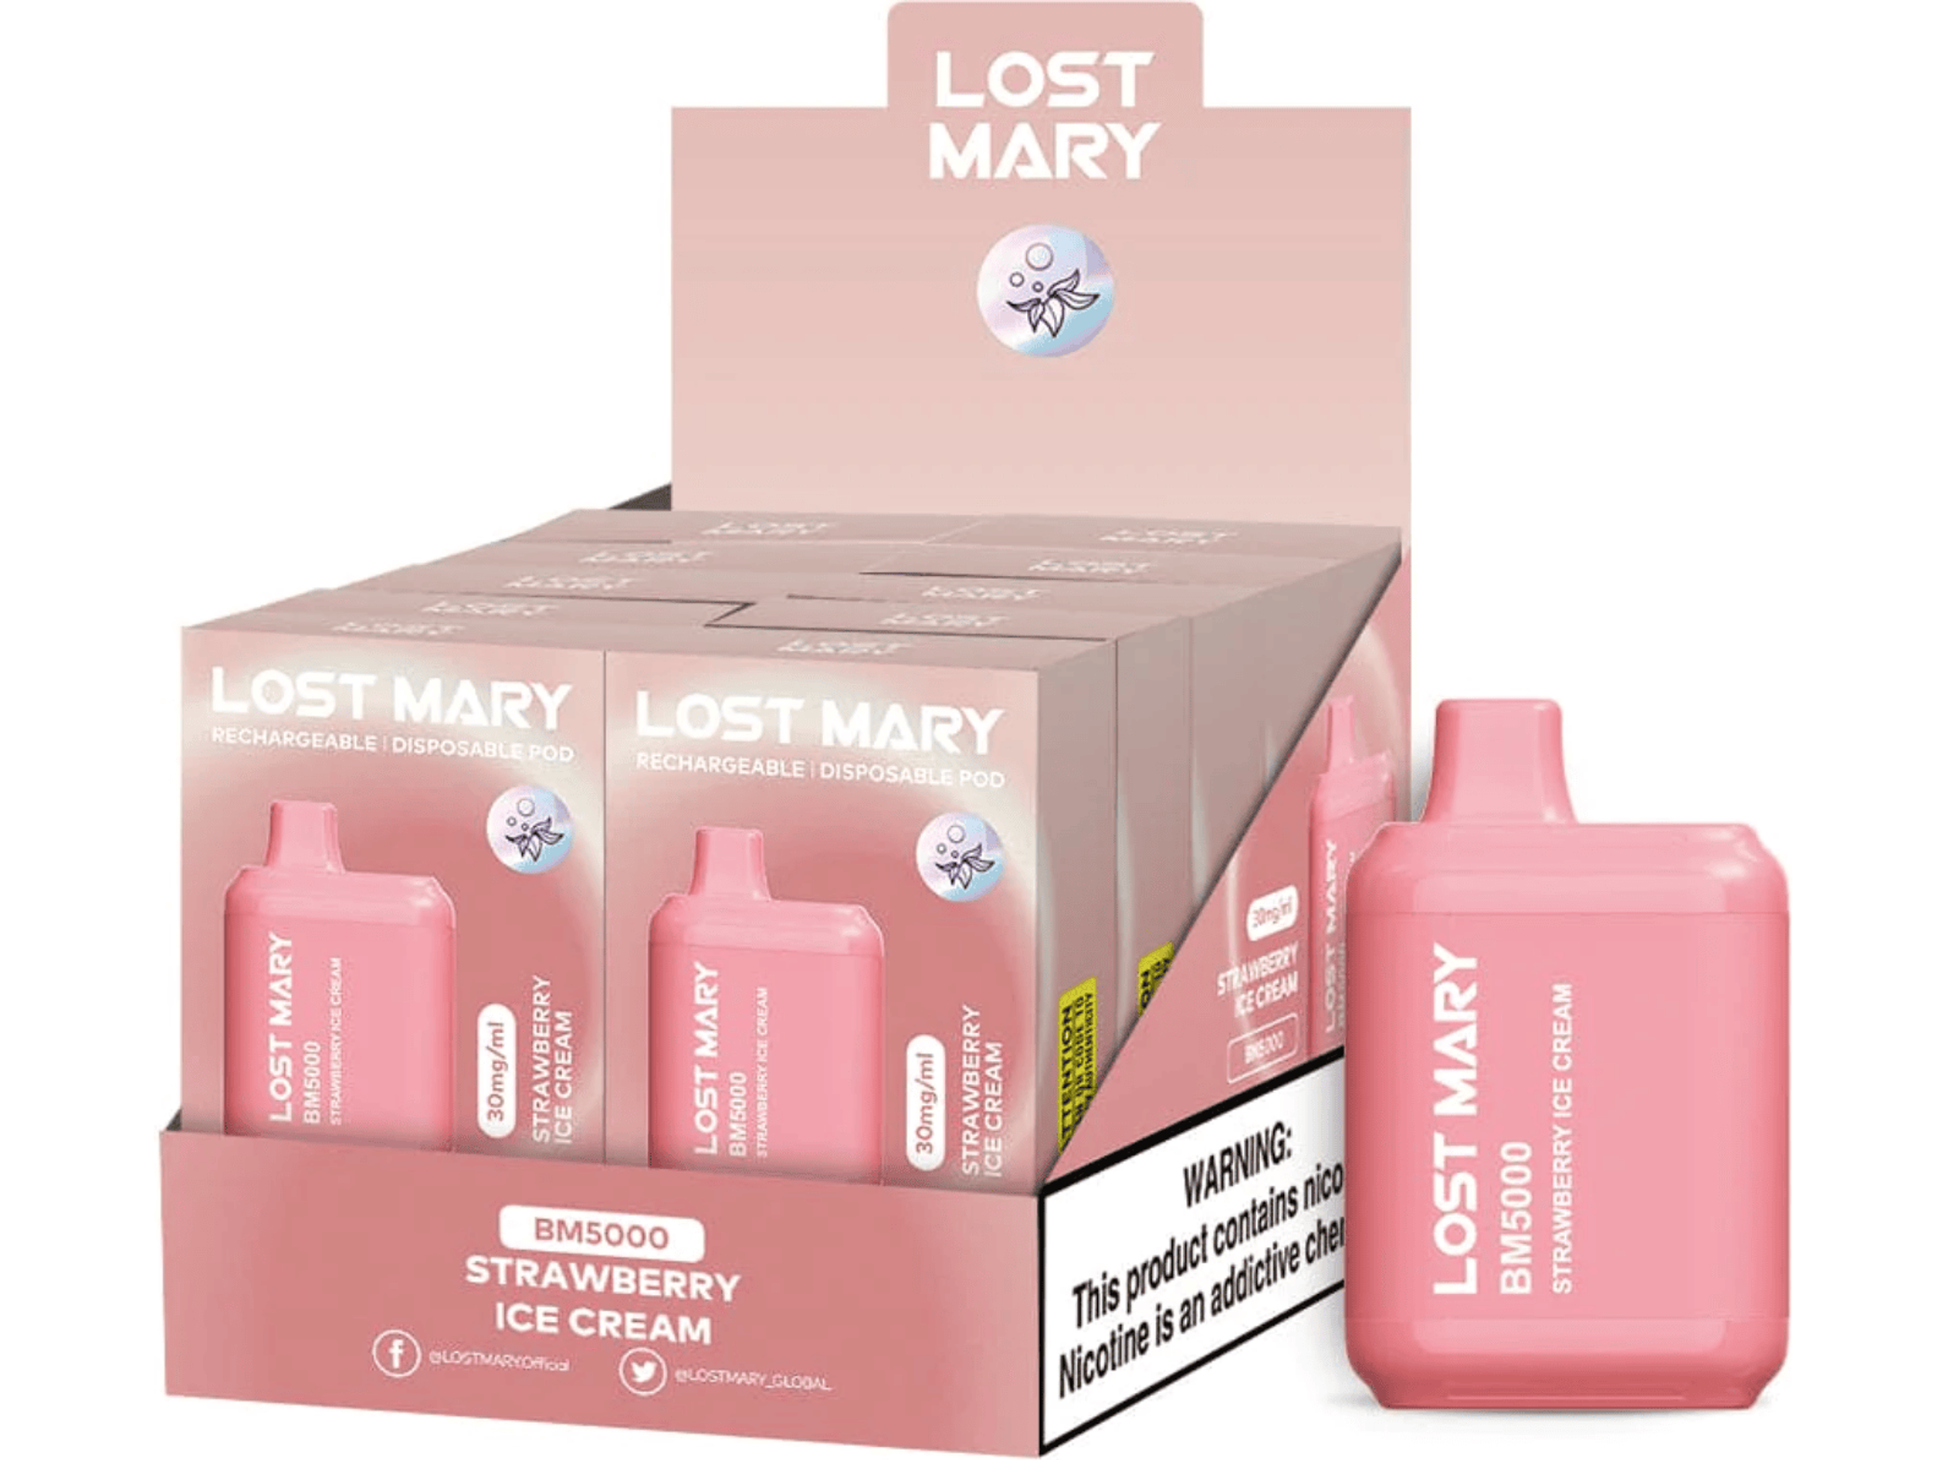 Lost Mary BM5000 Strawberry Ice Cream flavored disposable vape device and box.